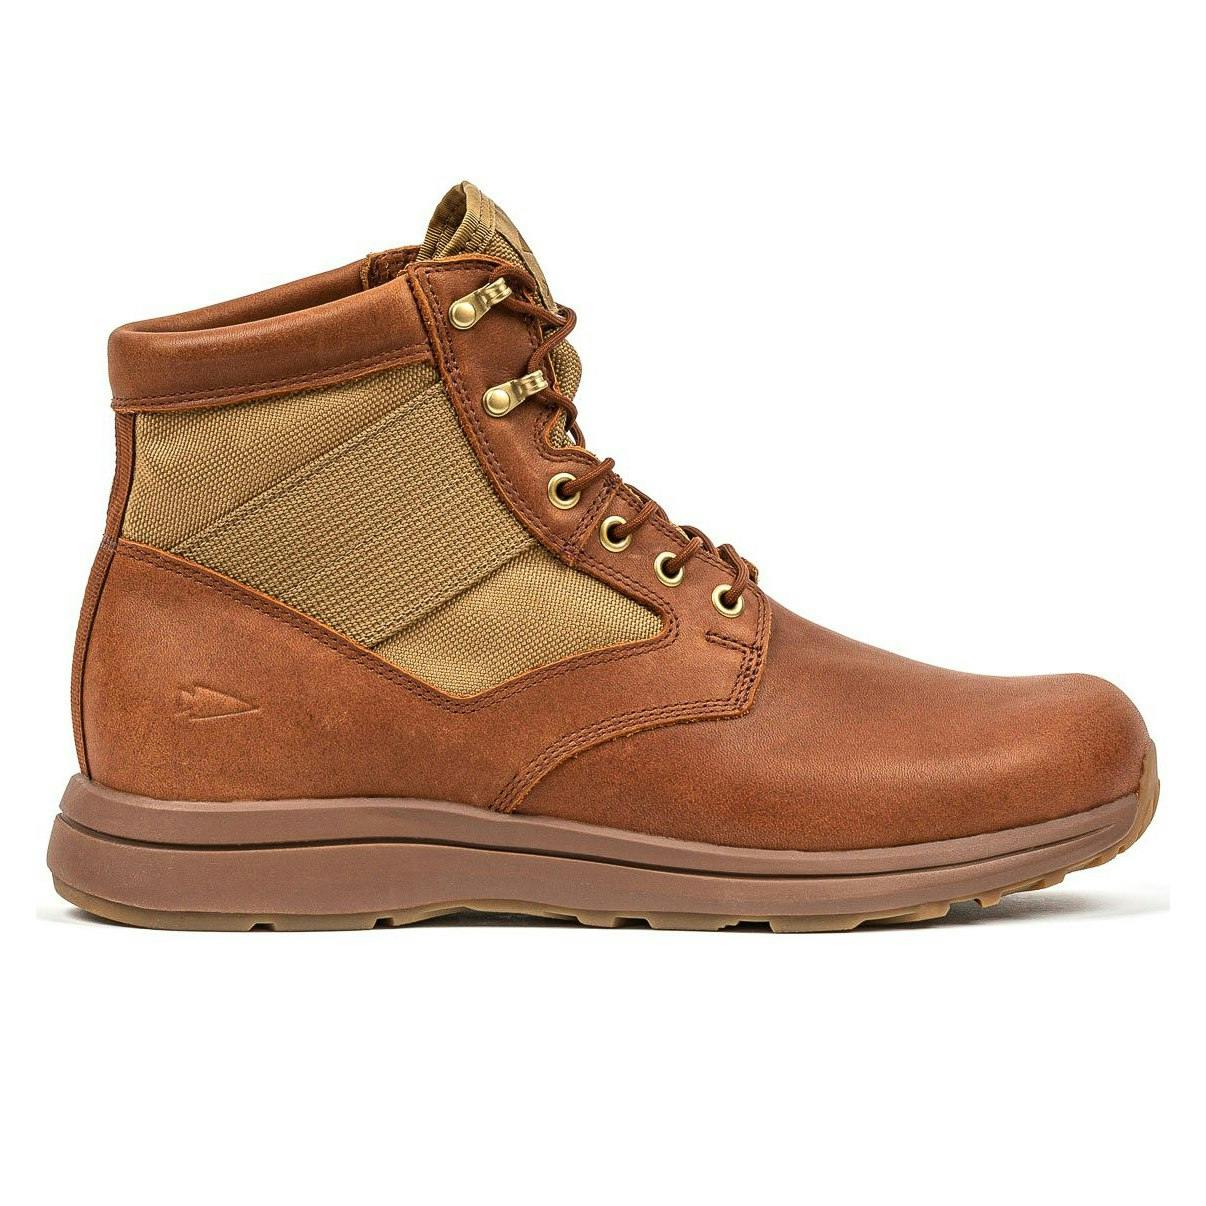 MACV-1 Mid Top Rucking Boots